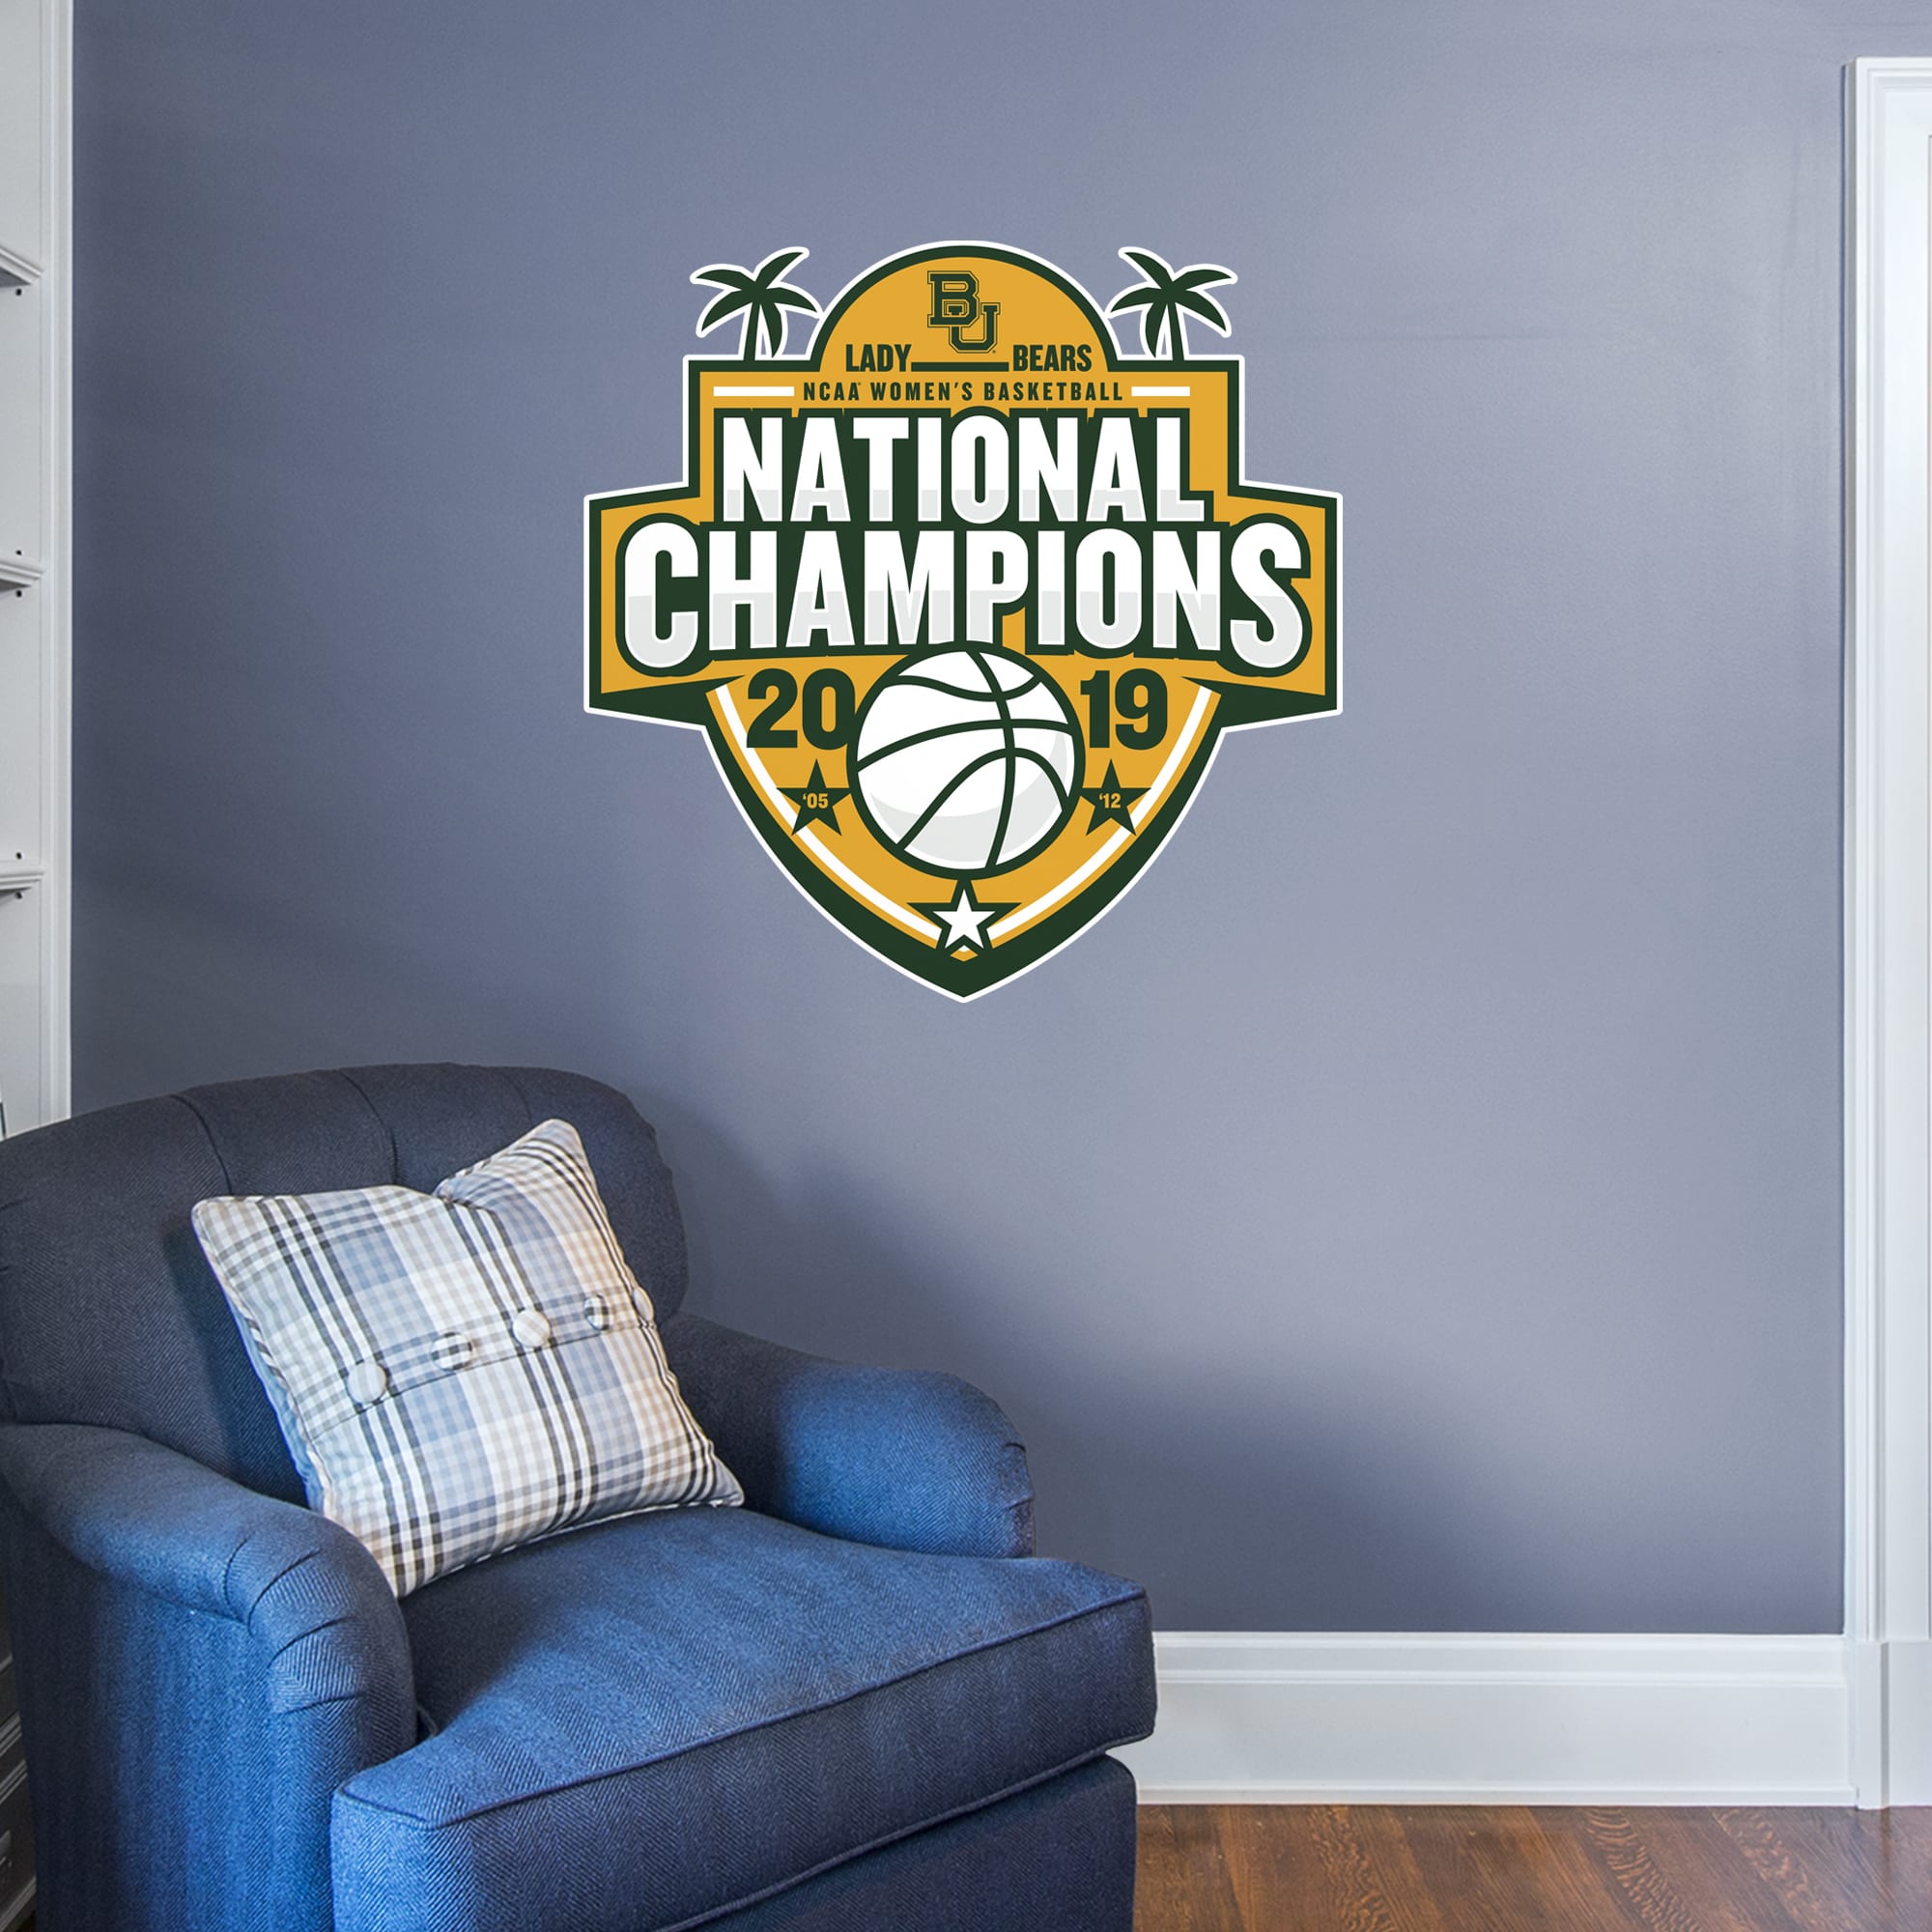 Baylor Bears: 2019 Womens Basketball National Champions Logo - Officially Licensed Removable Wall Decal Giant Logo (38"W x 39"H